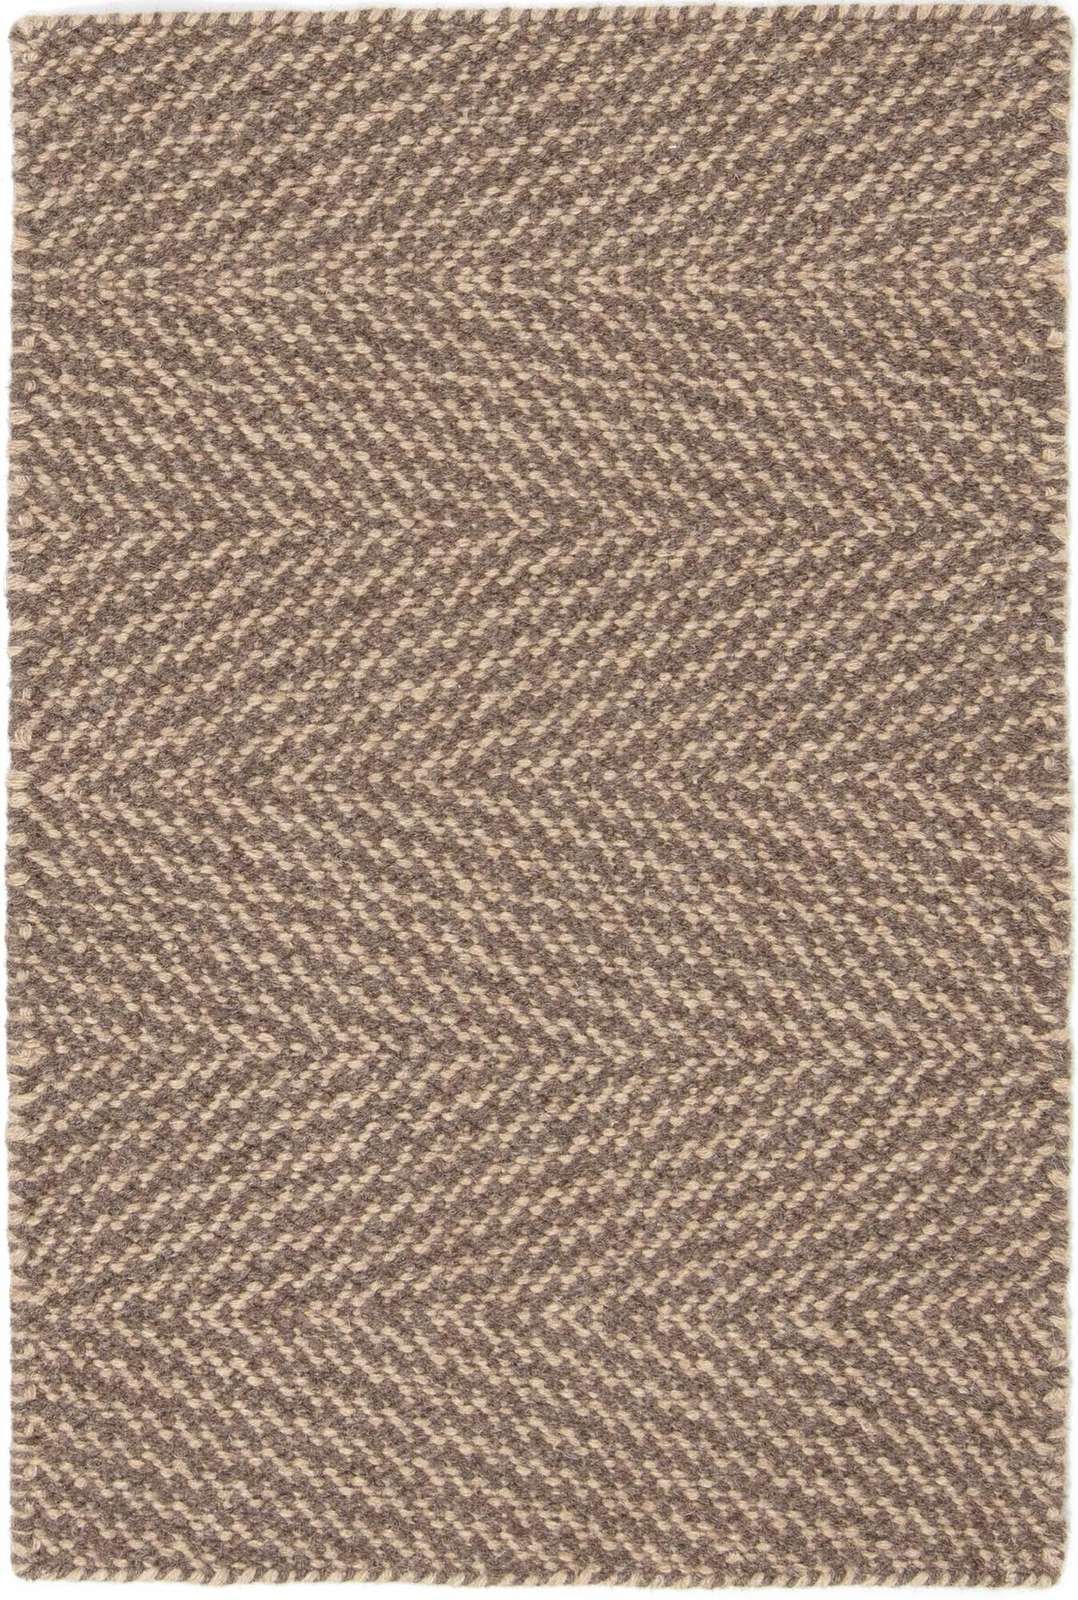 Taupe